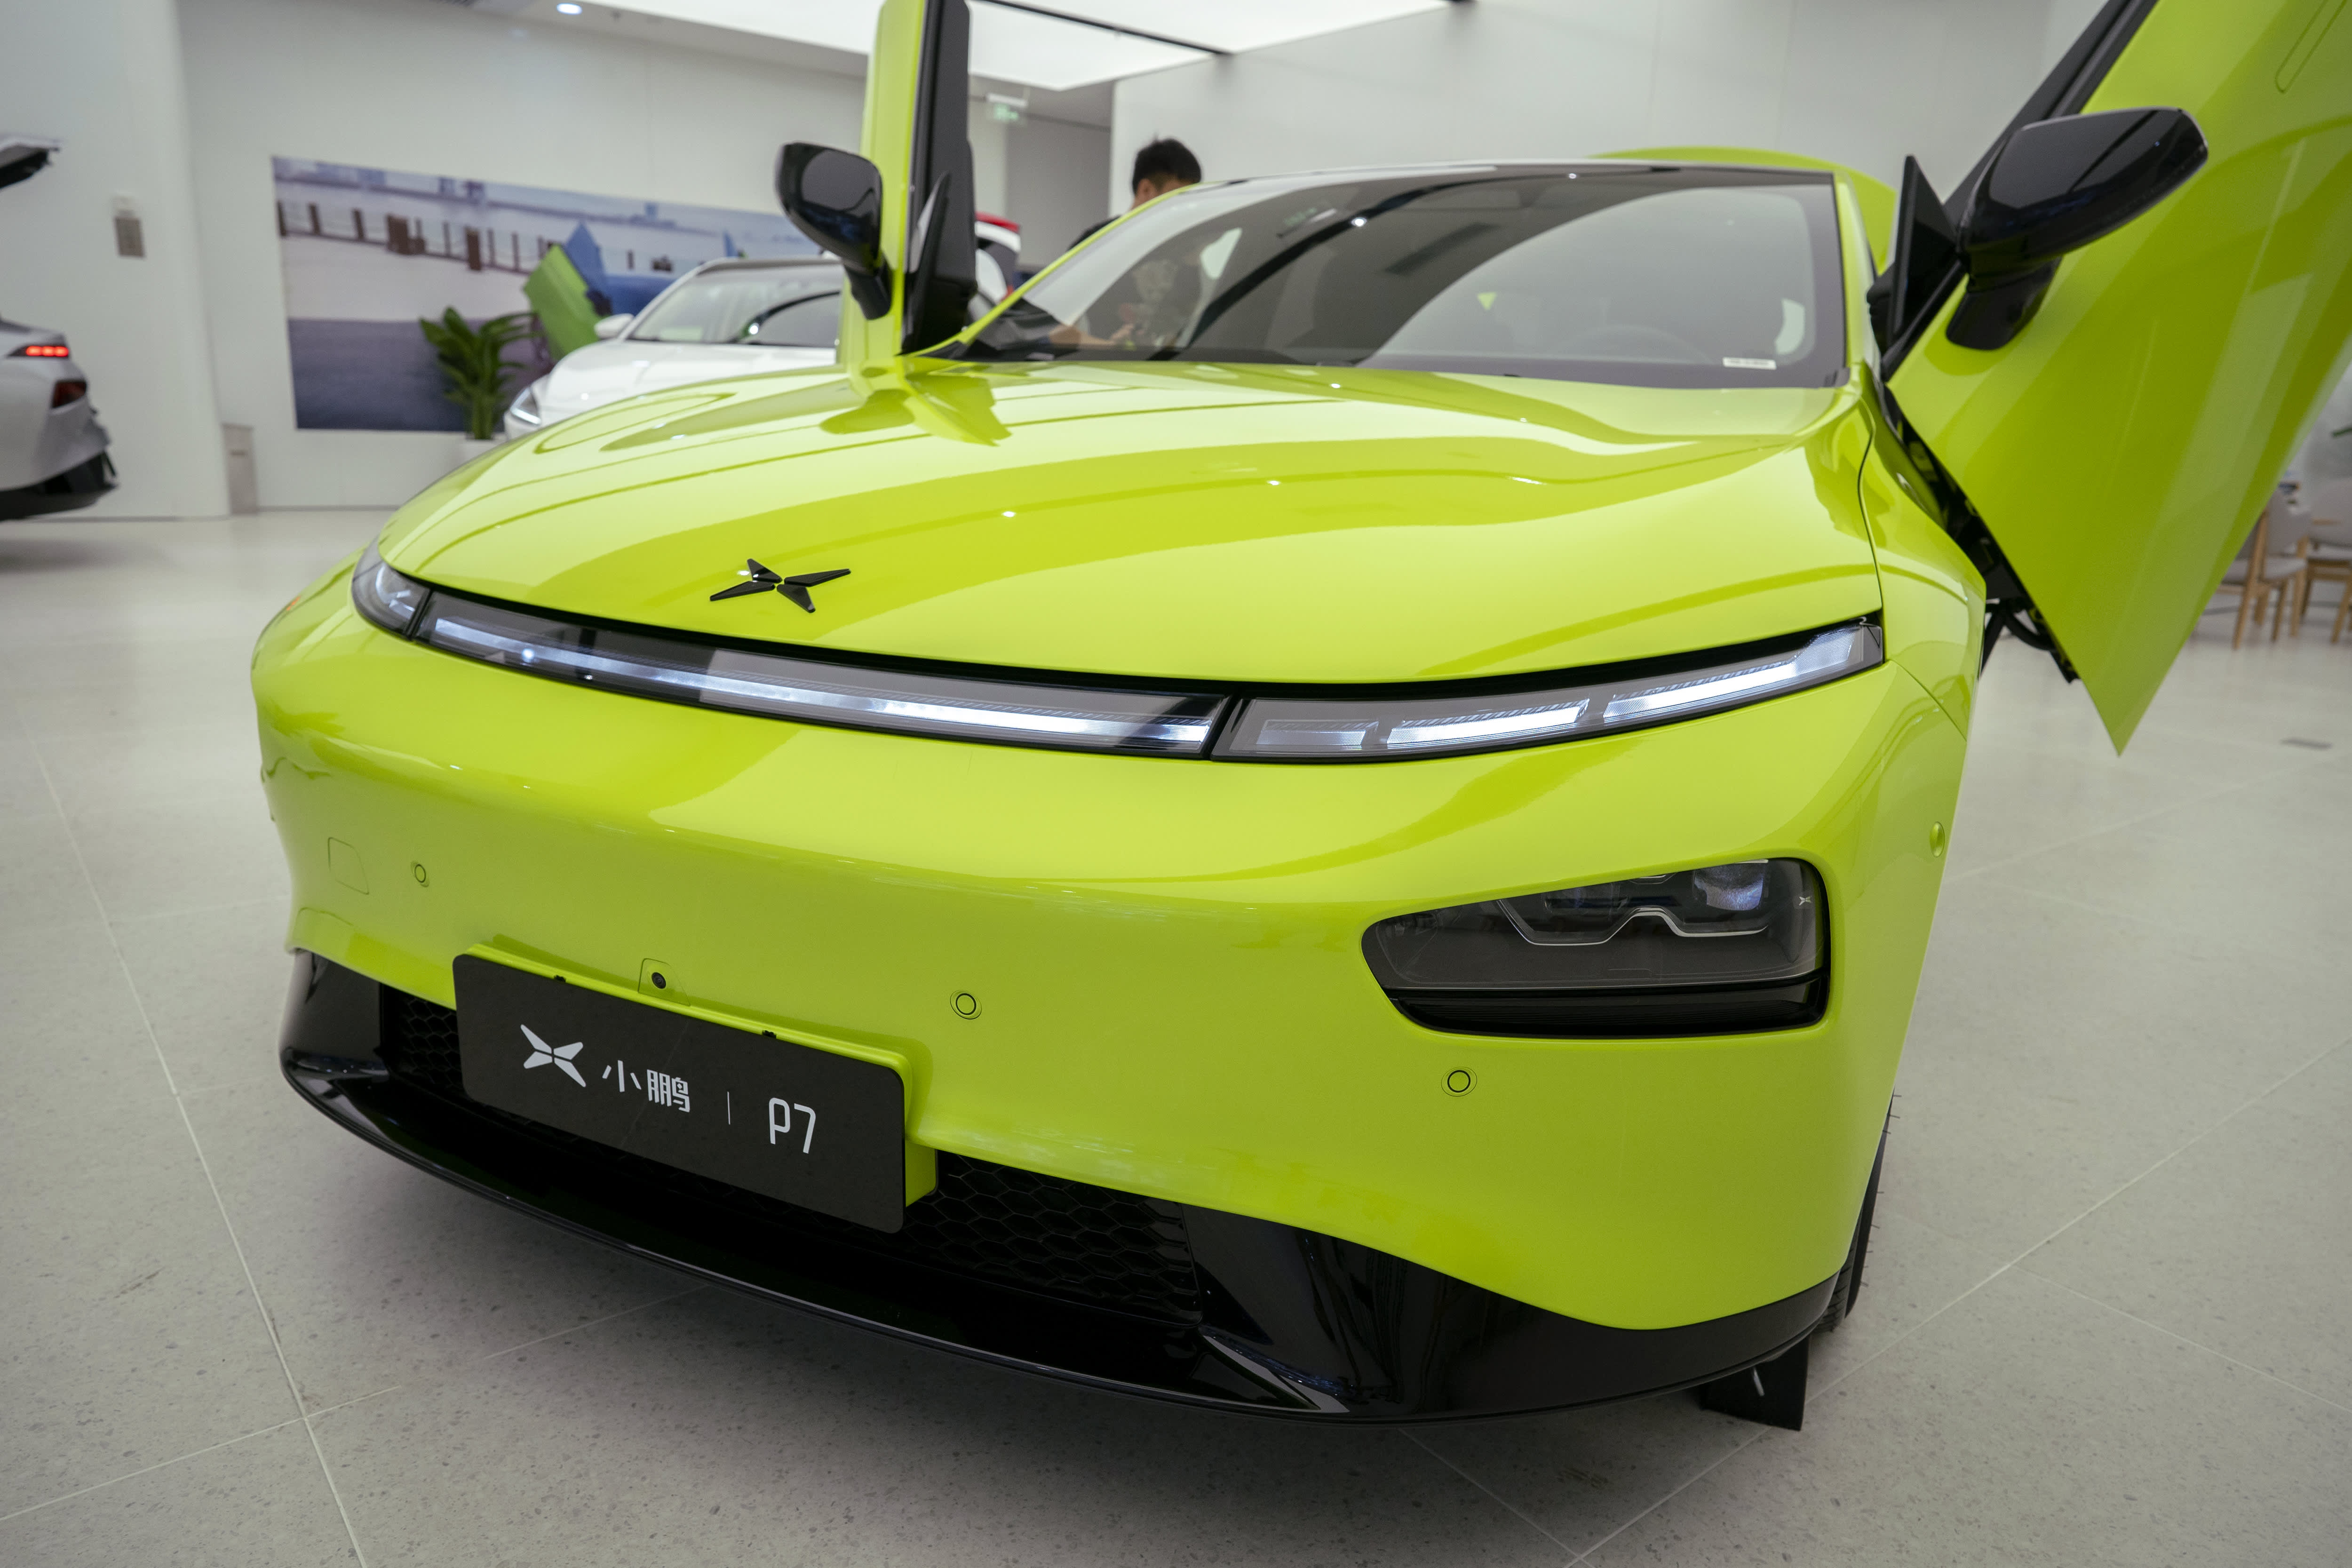 Chinese electric carmaker Xpeng on ‘right side’ of regulation: Exec